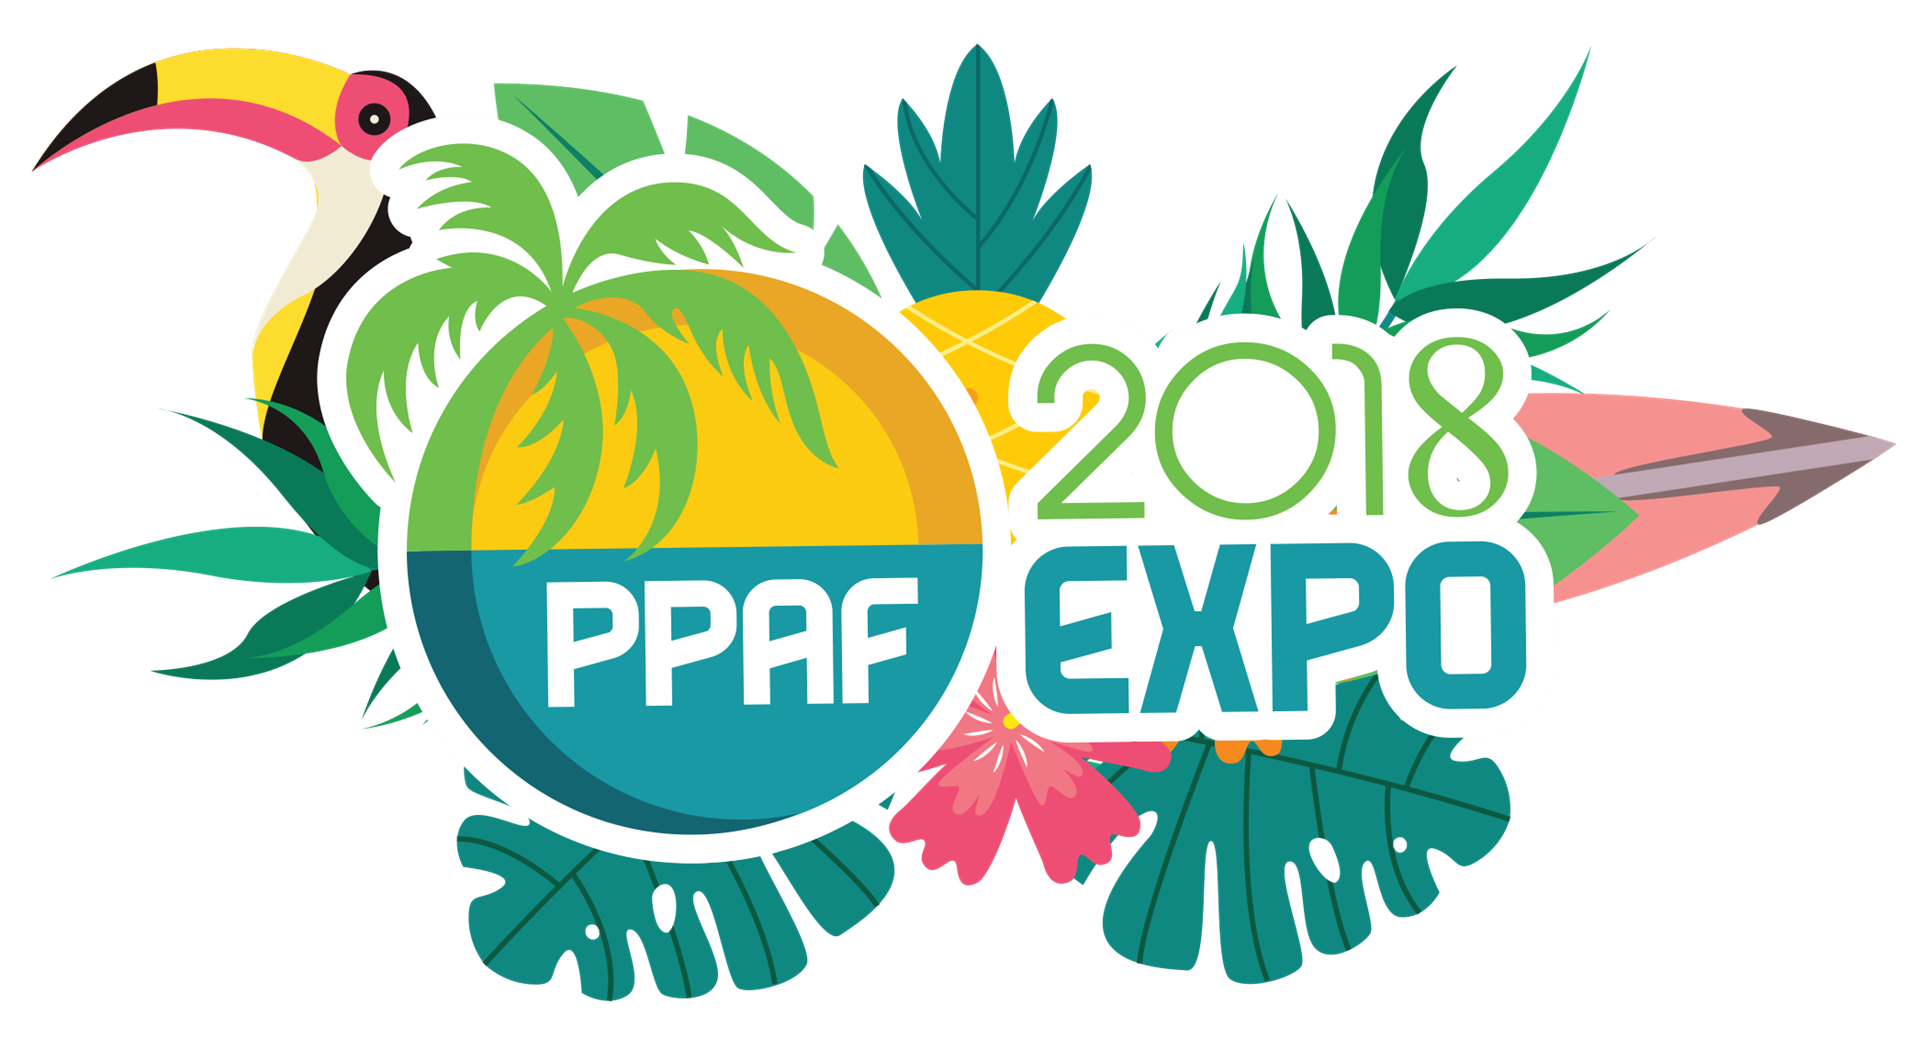 Ppaf expo